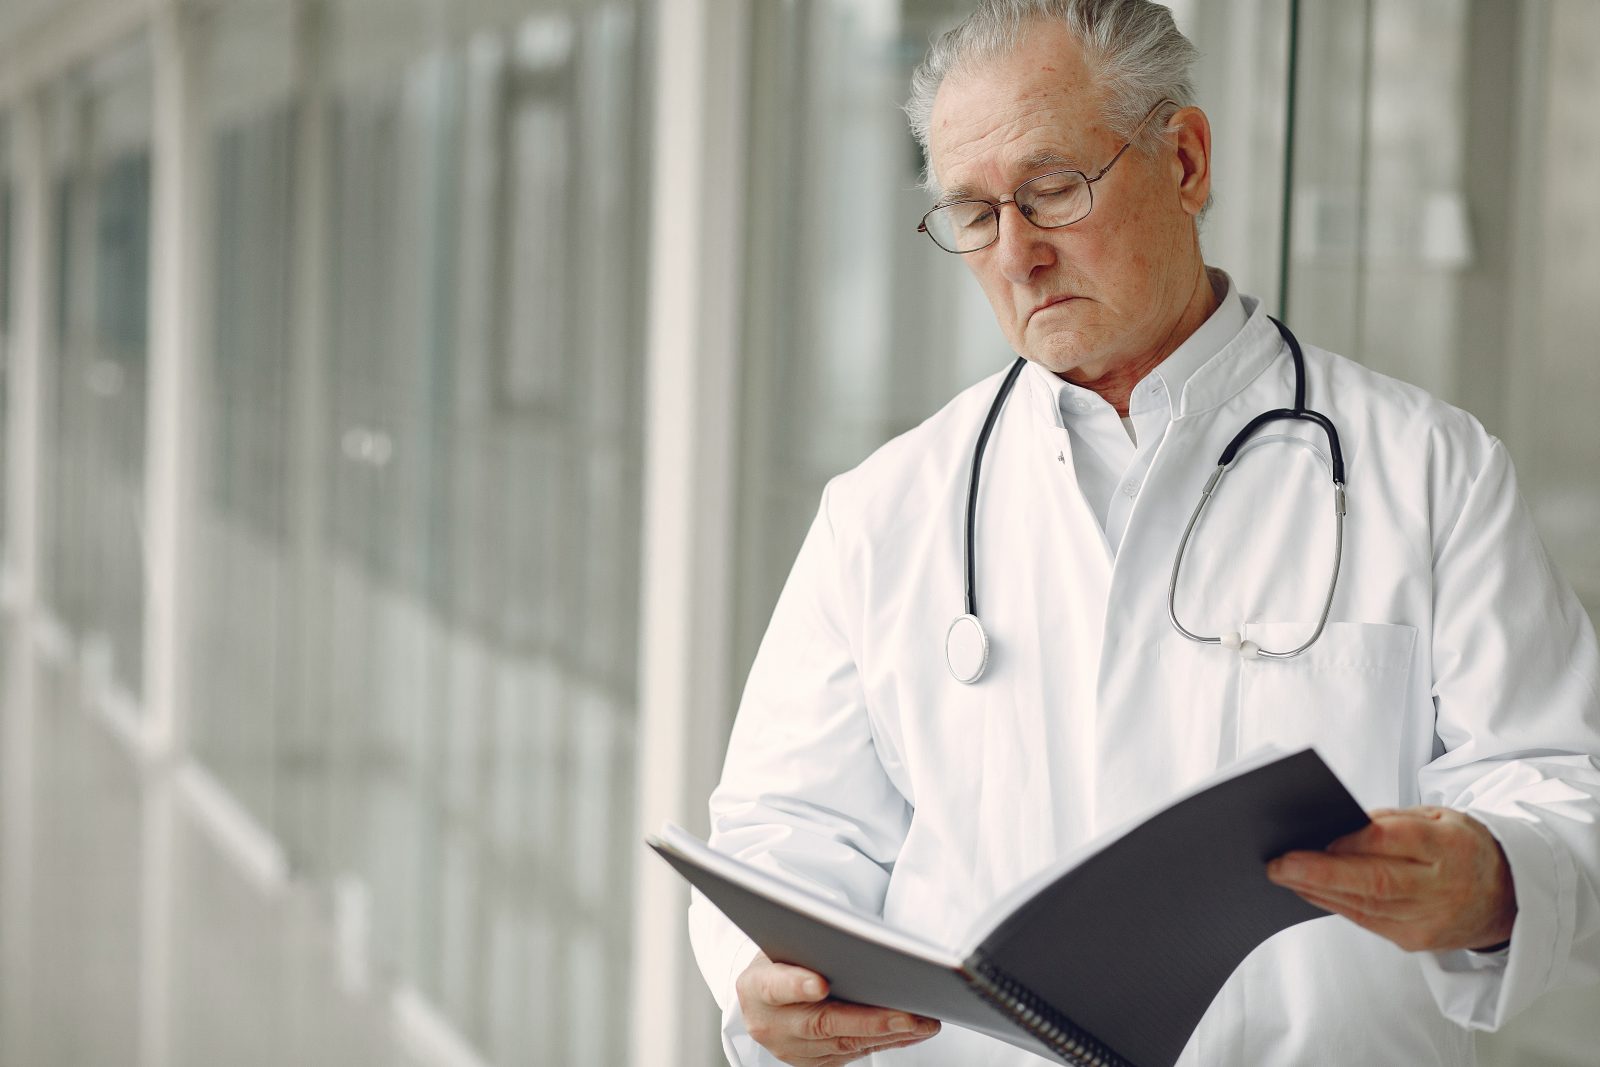 Contemplative doctor in uniform reading clinical records